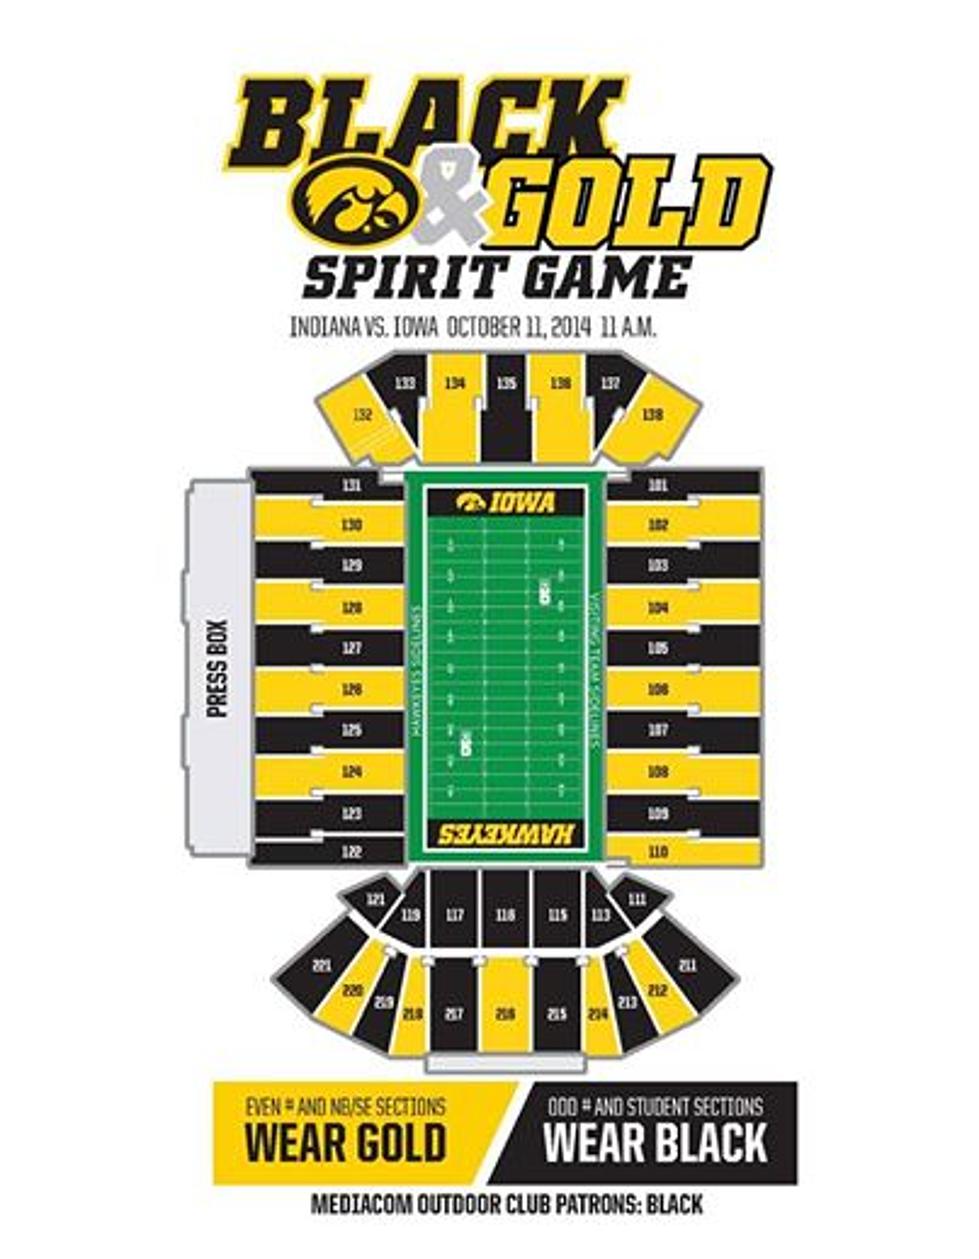 It’s The Annual Black & Gold Spirit Game Tonight At Kinnick